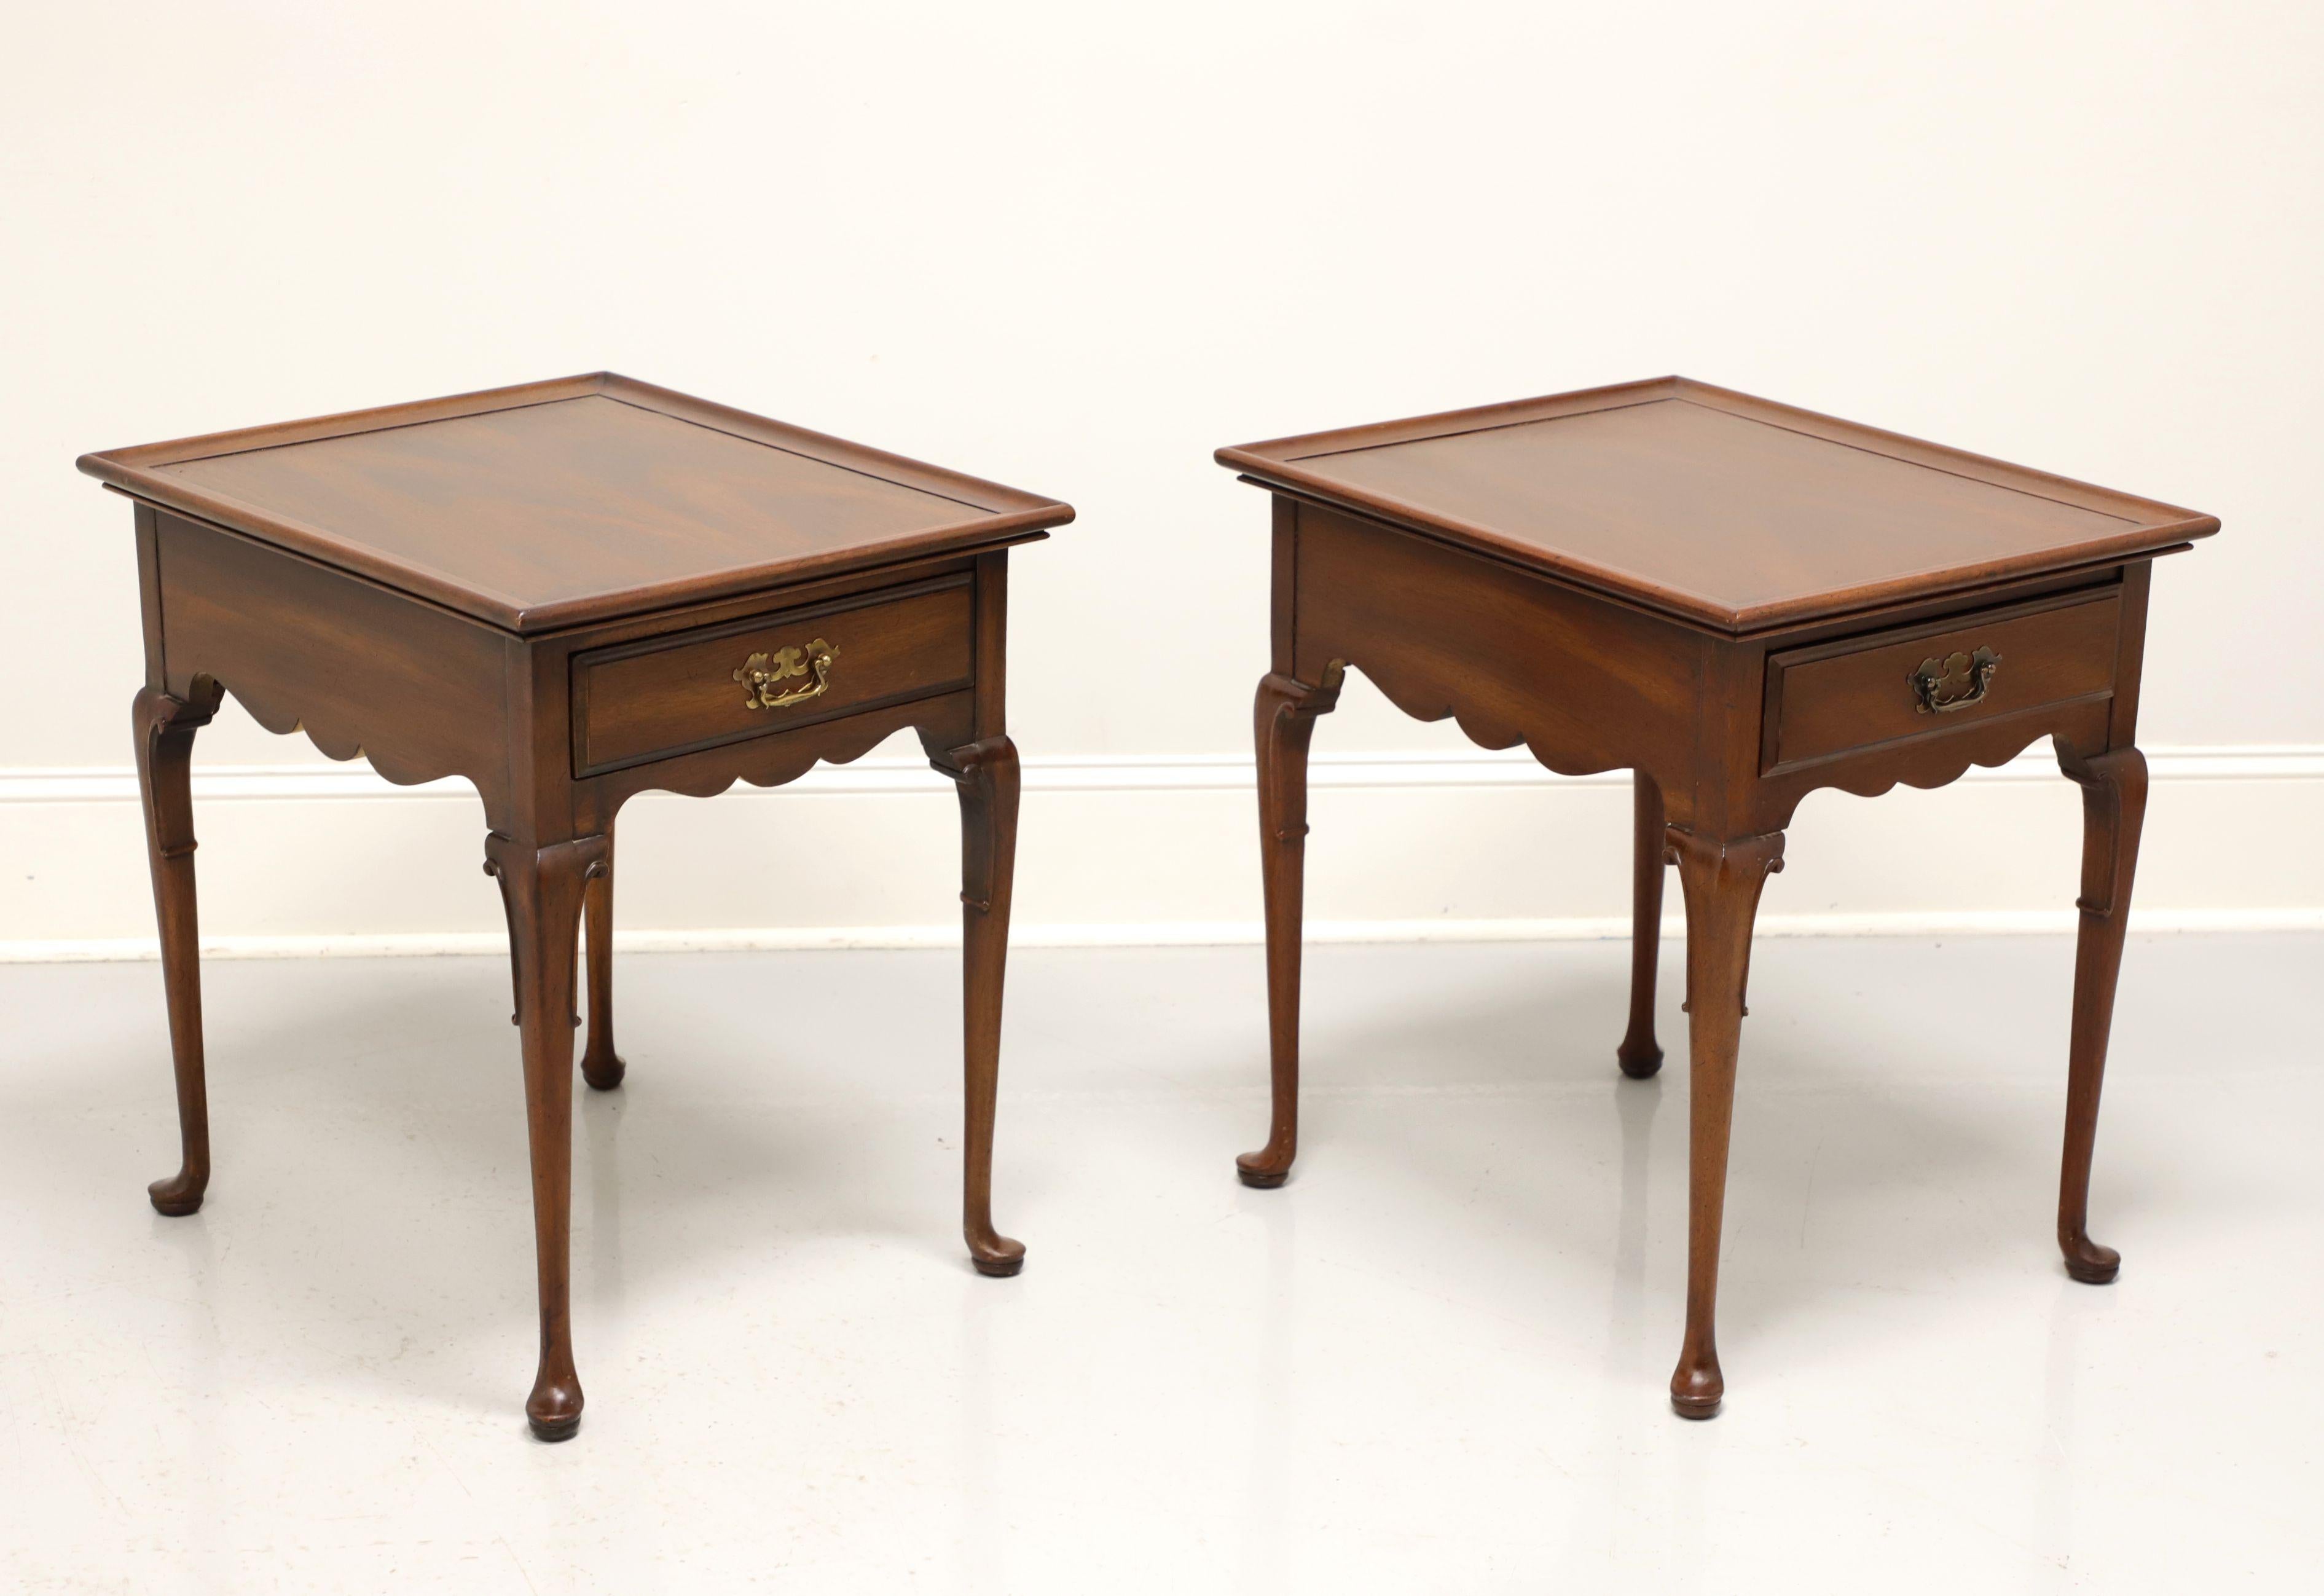 A pair of Georgian style end tables by Globe Furniture. Mahogany with brass hardware, decorative knees, cabriole legs and pad feet. Each features one drawer of dovetail construction. Made in the USA, in the mid 20th century.

Measures: 20 W 24 D